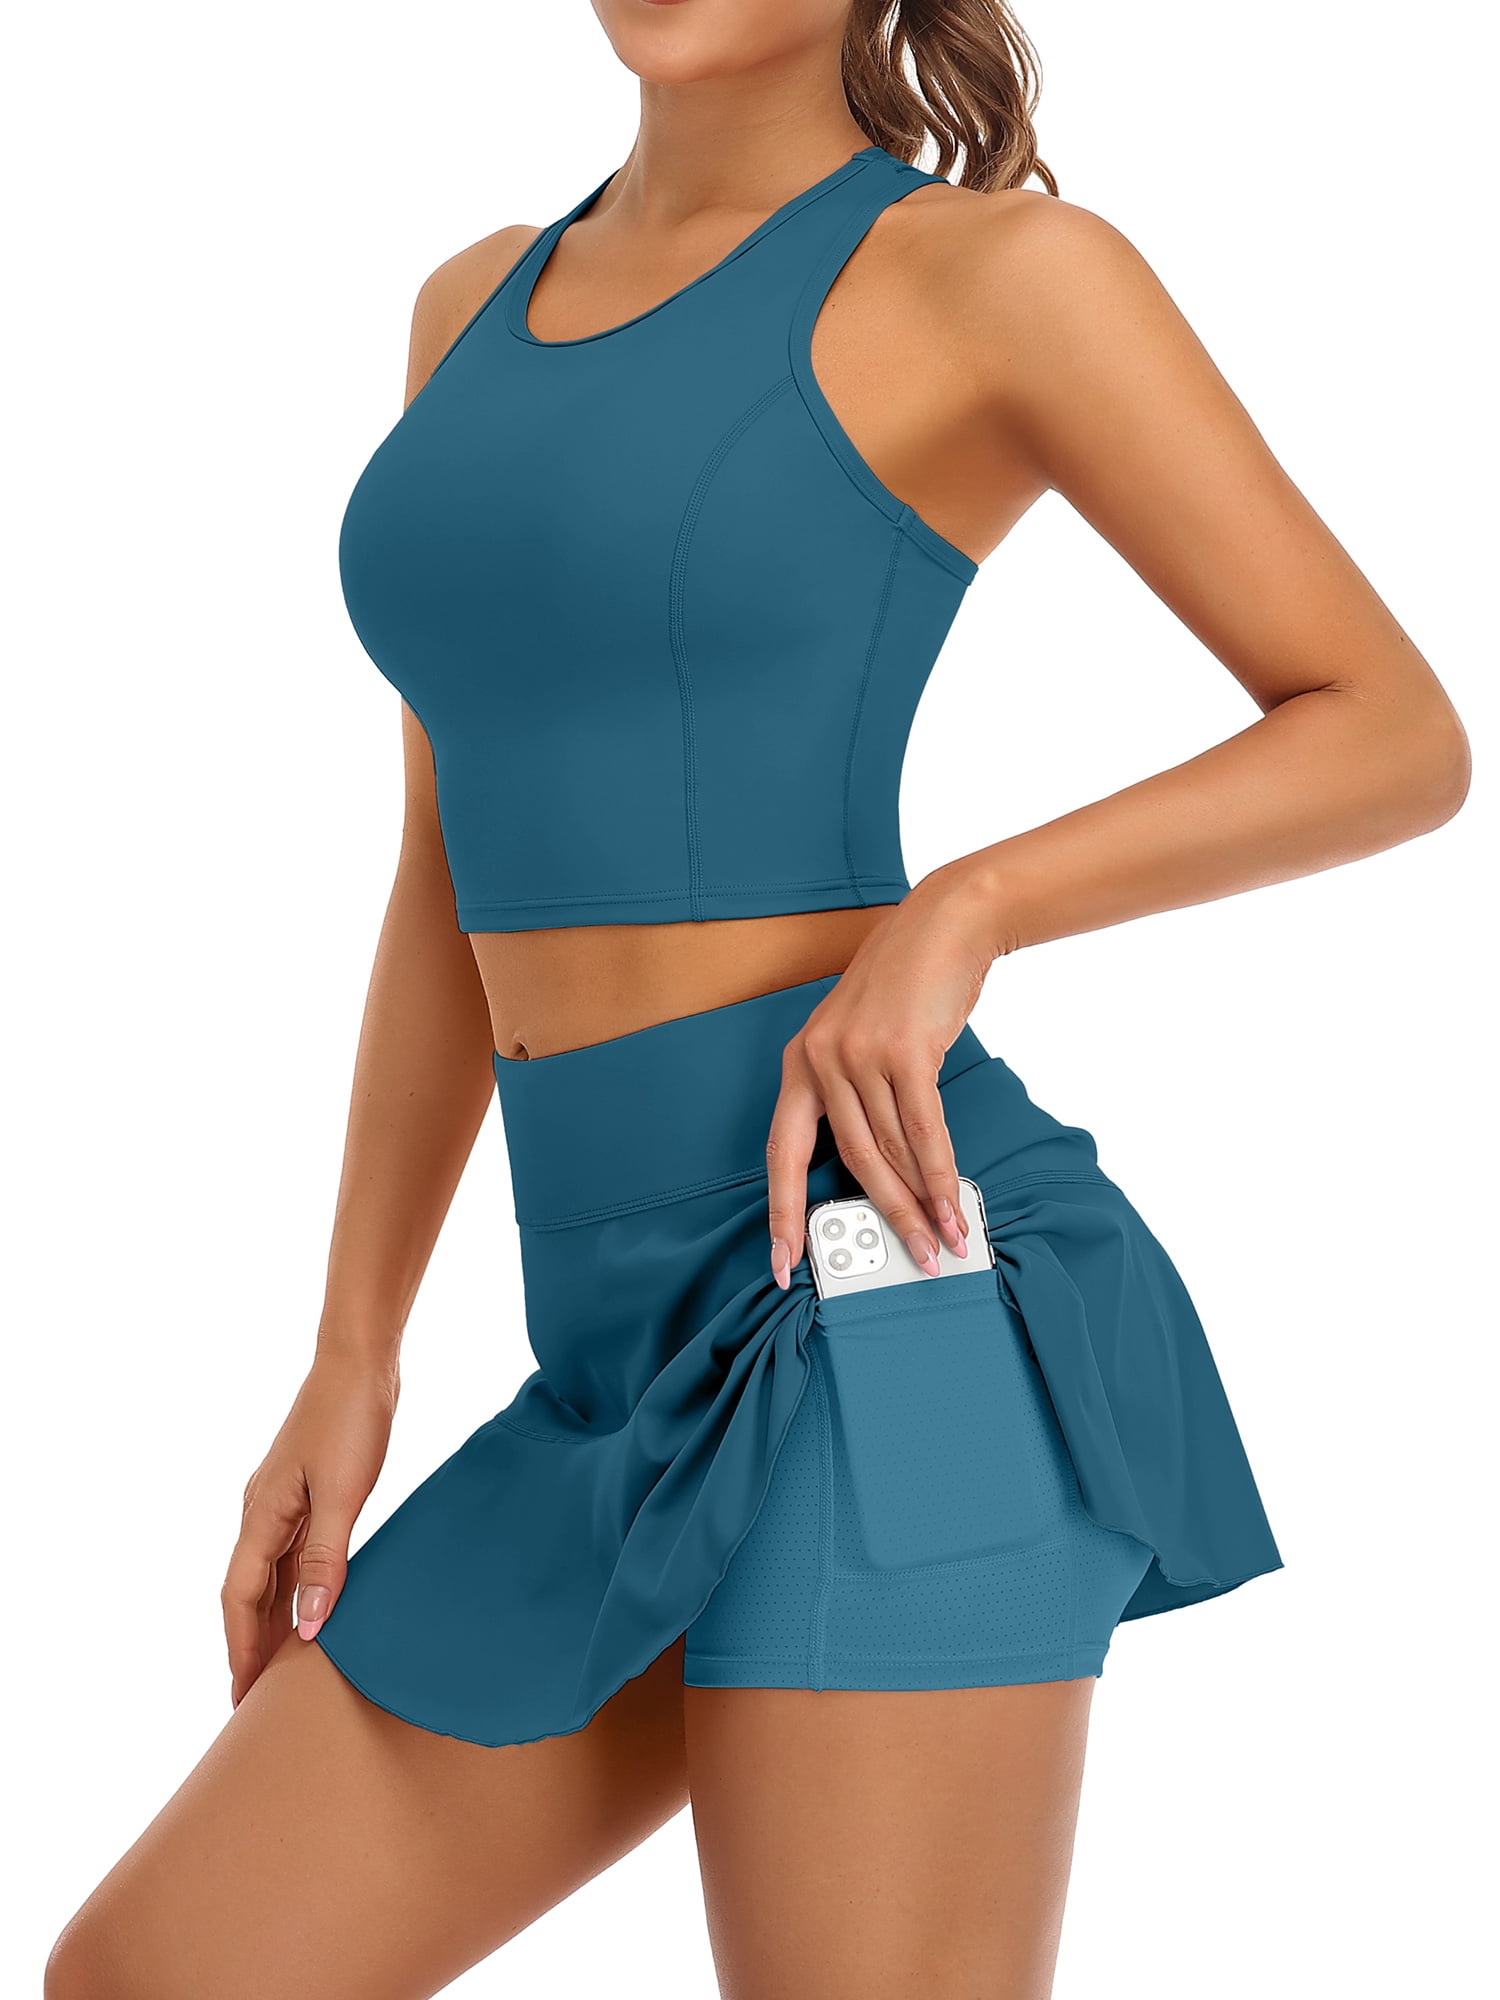 Womens 2 Piece Tennis Skirts Sets with Built-in Shorts and Pockets Workout Outfits Dresses